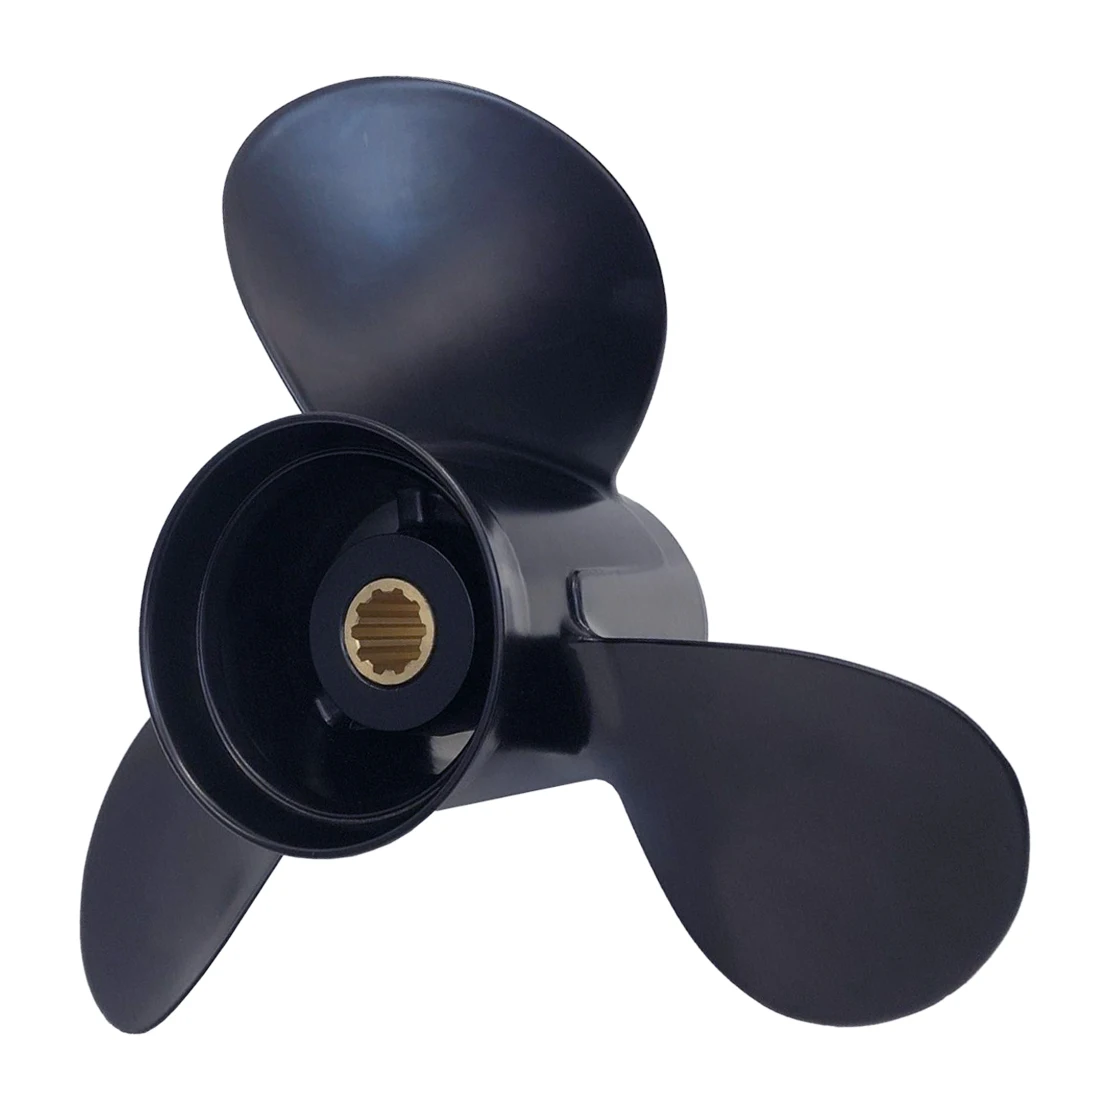 48-19640A40 346-64104-5 3R0B645270 Boat Propeller Aluminum Alloy Fit for Mercury Mariner Tohatsu Nissan Outboard 25-30HP Black